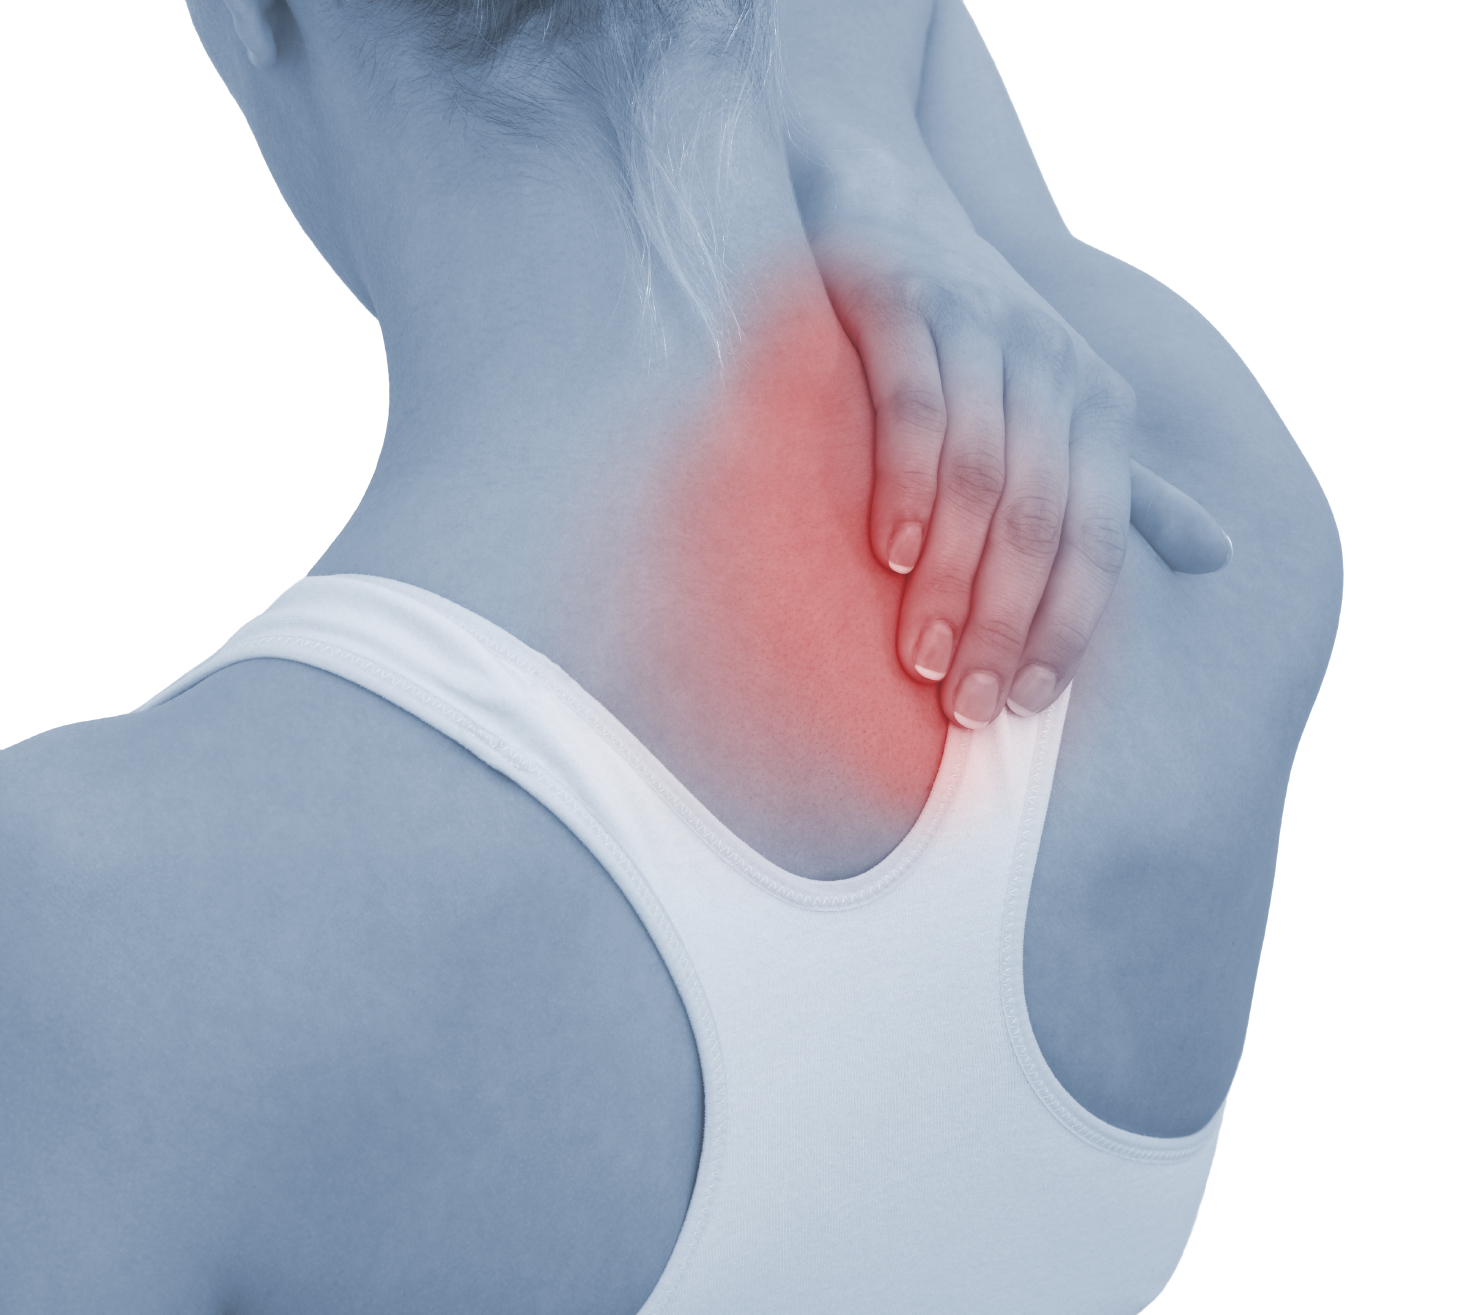 Astym therapy can address neck pain